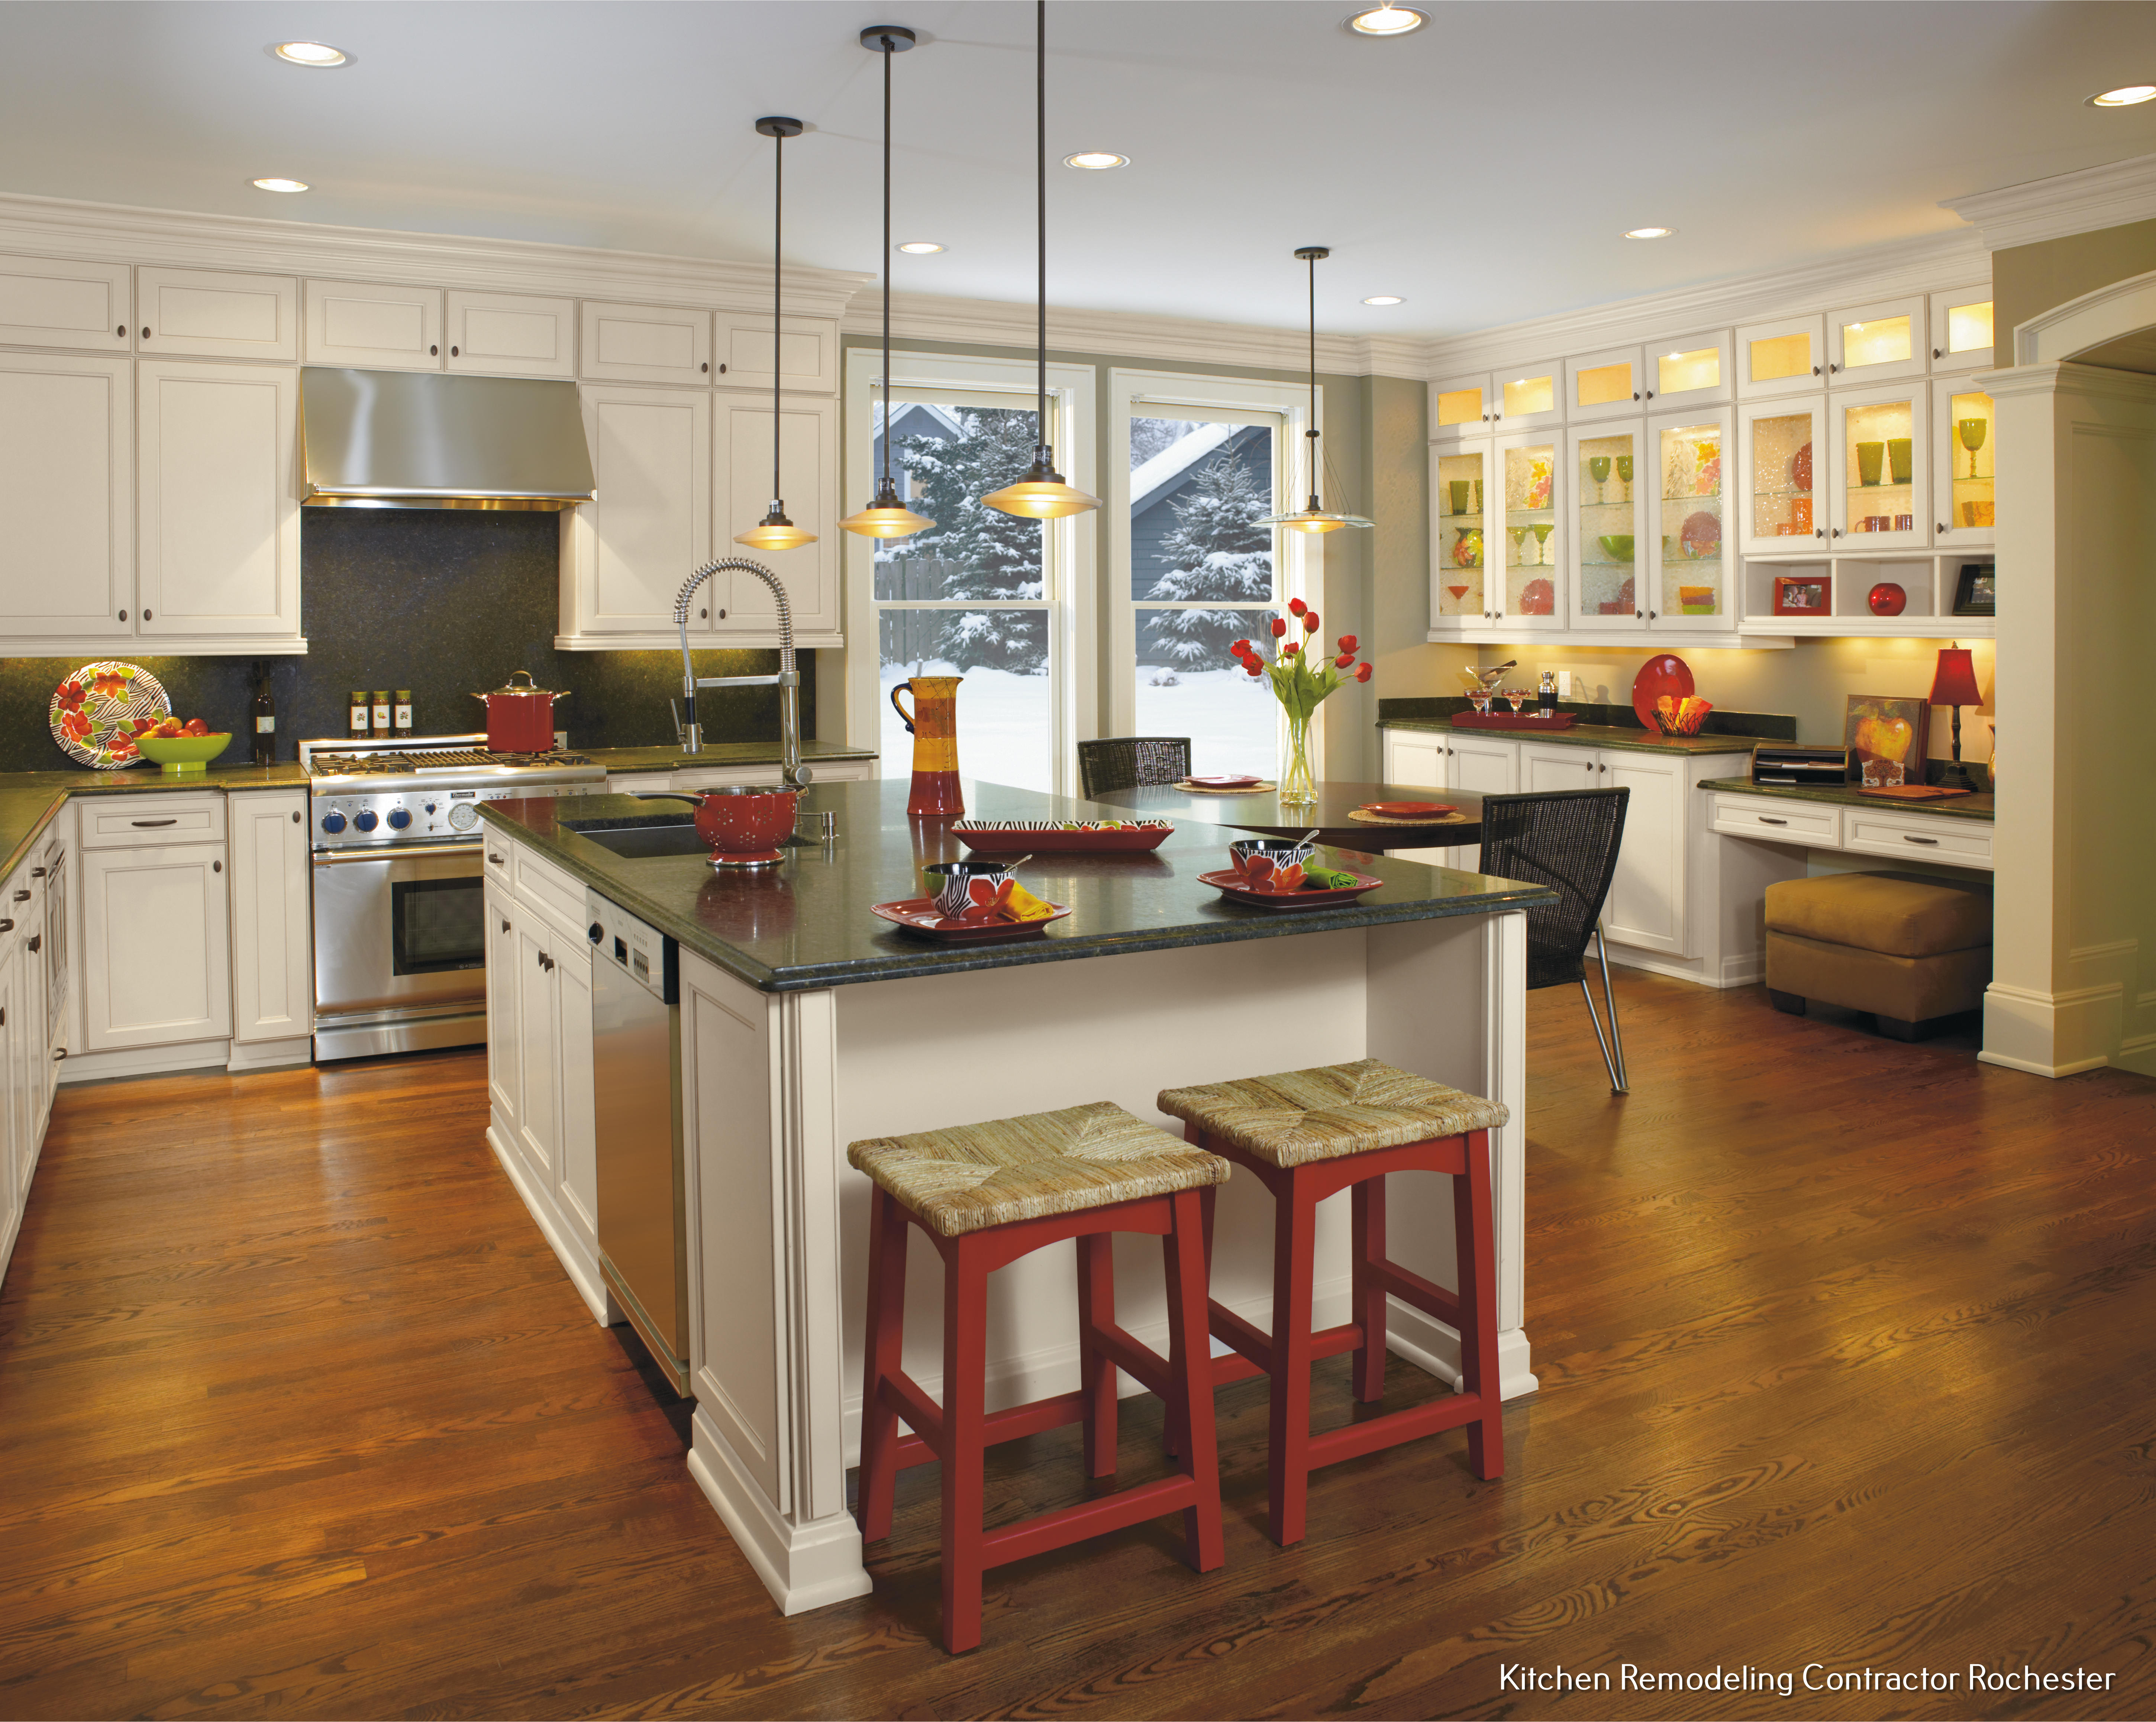 Kitchens By Premier Shares Tips for a Successful Kitchen Remodel